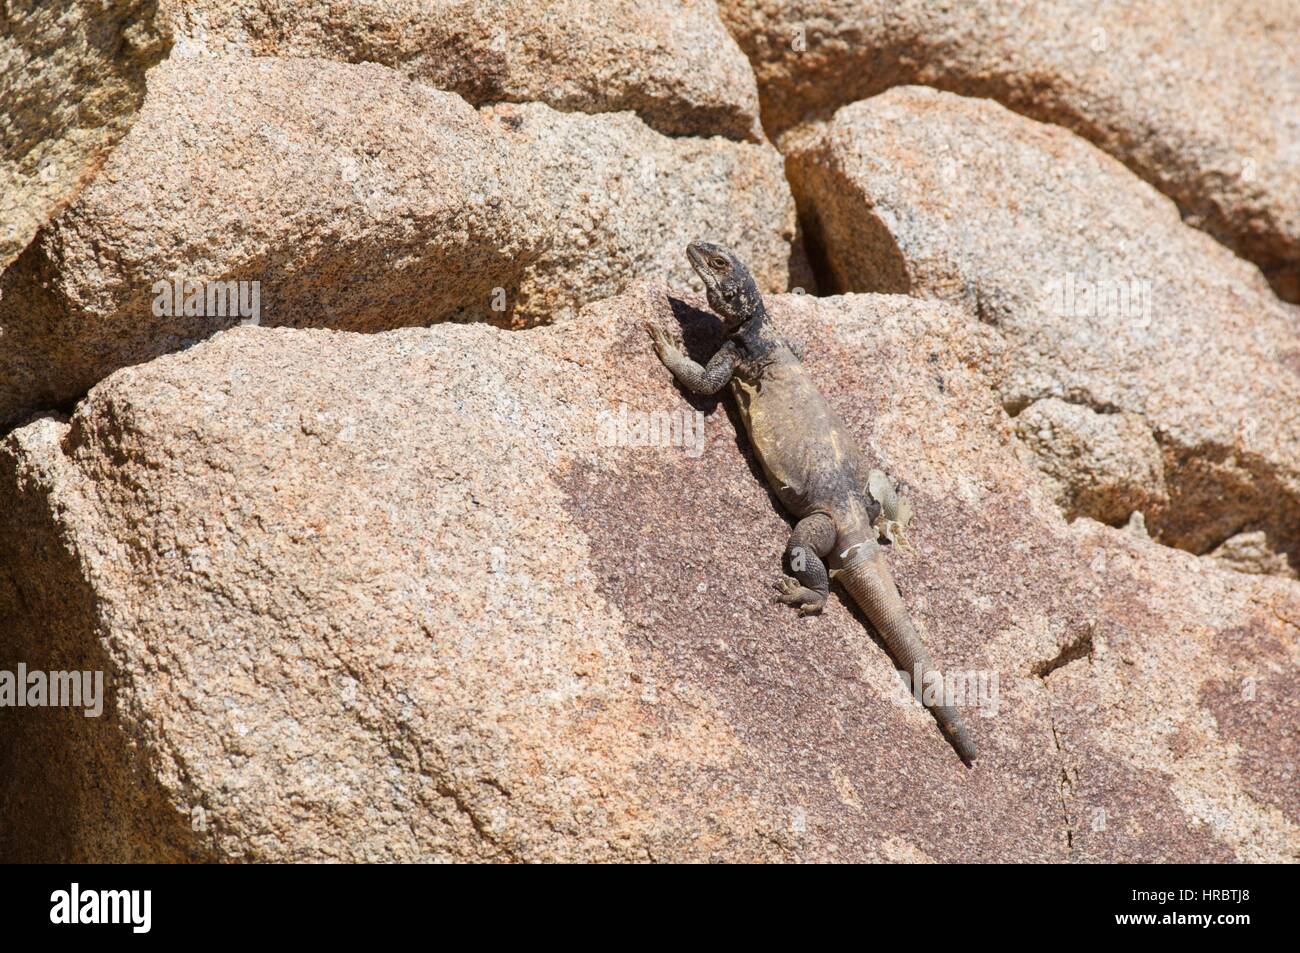 A Common Chuckwalla (Sauromalus ater) basking on granite boulders in Mountain Spring, San Diego County, California Stock Photo